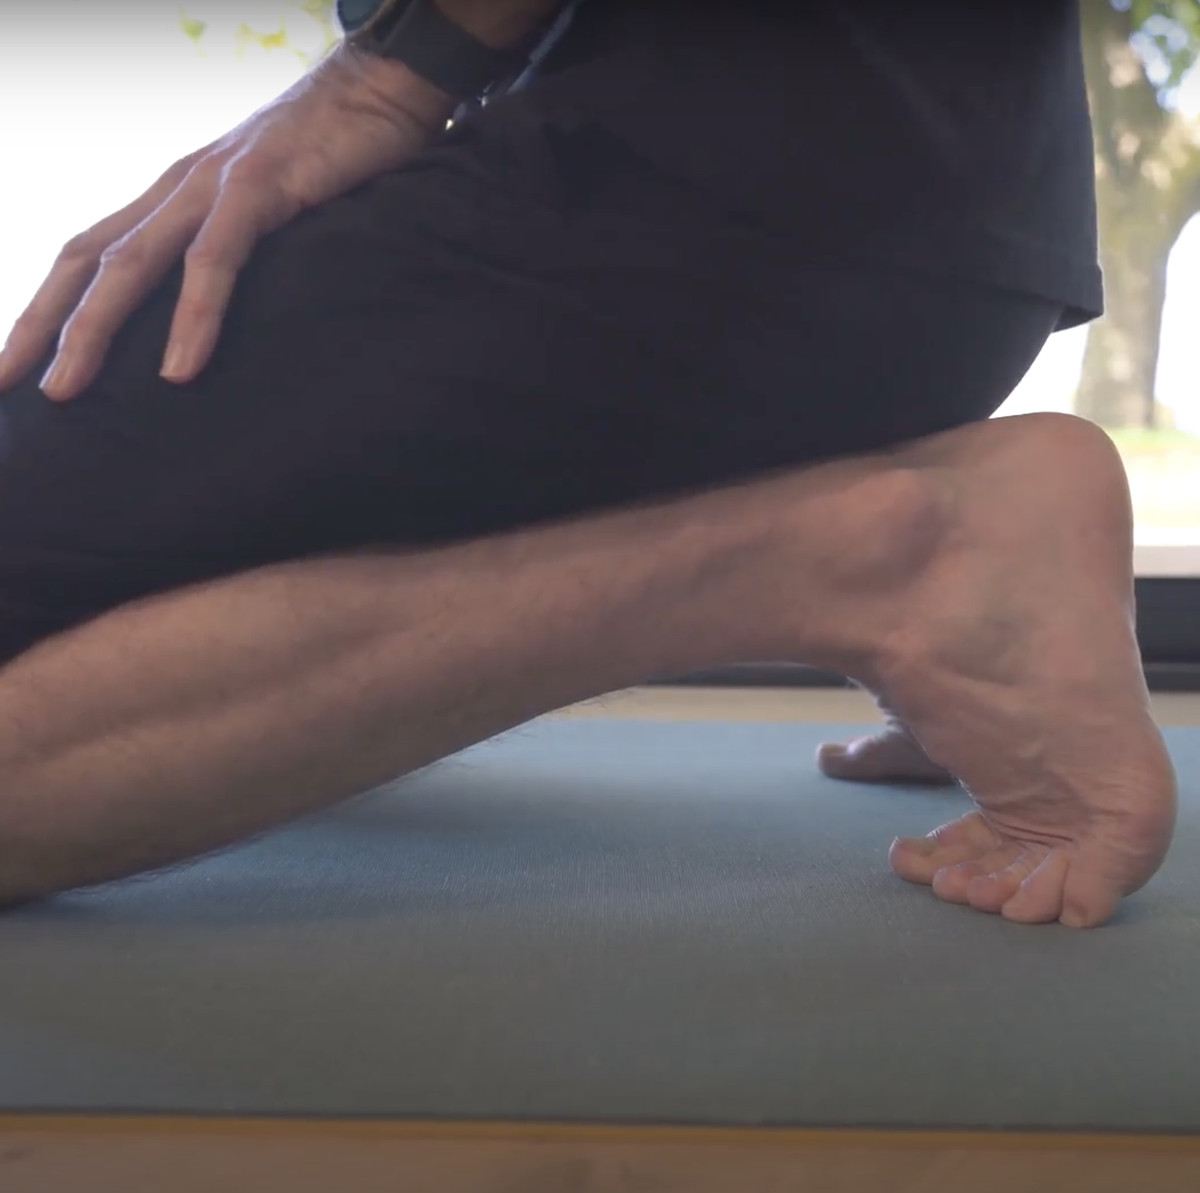 4 Exercises To Prevent Foot and Ankle Pain